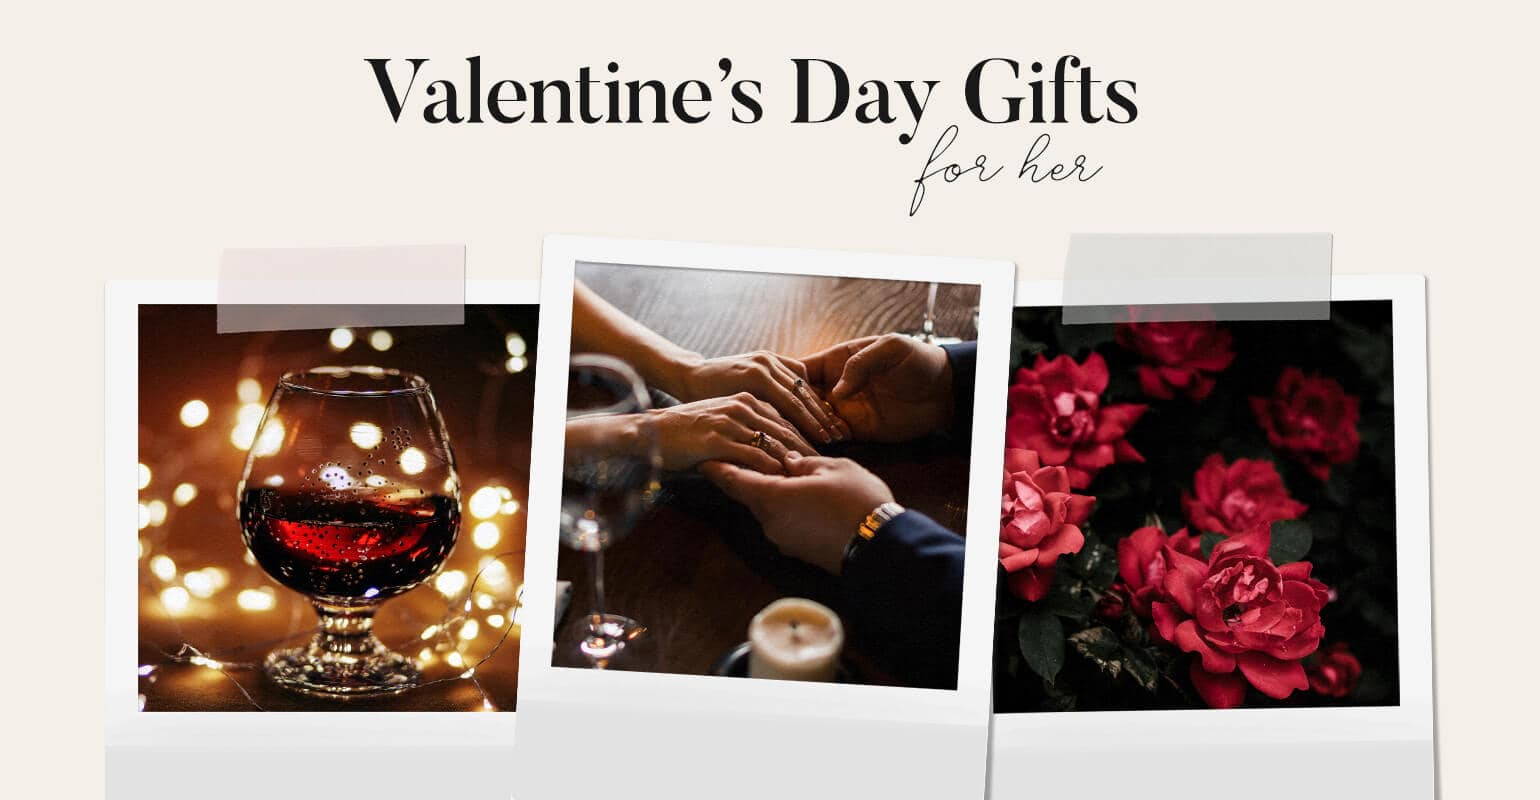 11 Sweet Valentine’s Day Gifts for Her